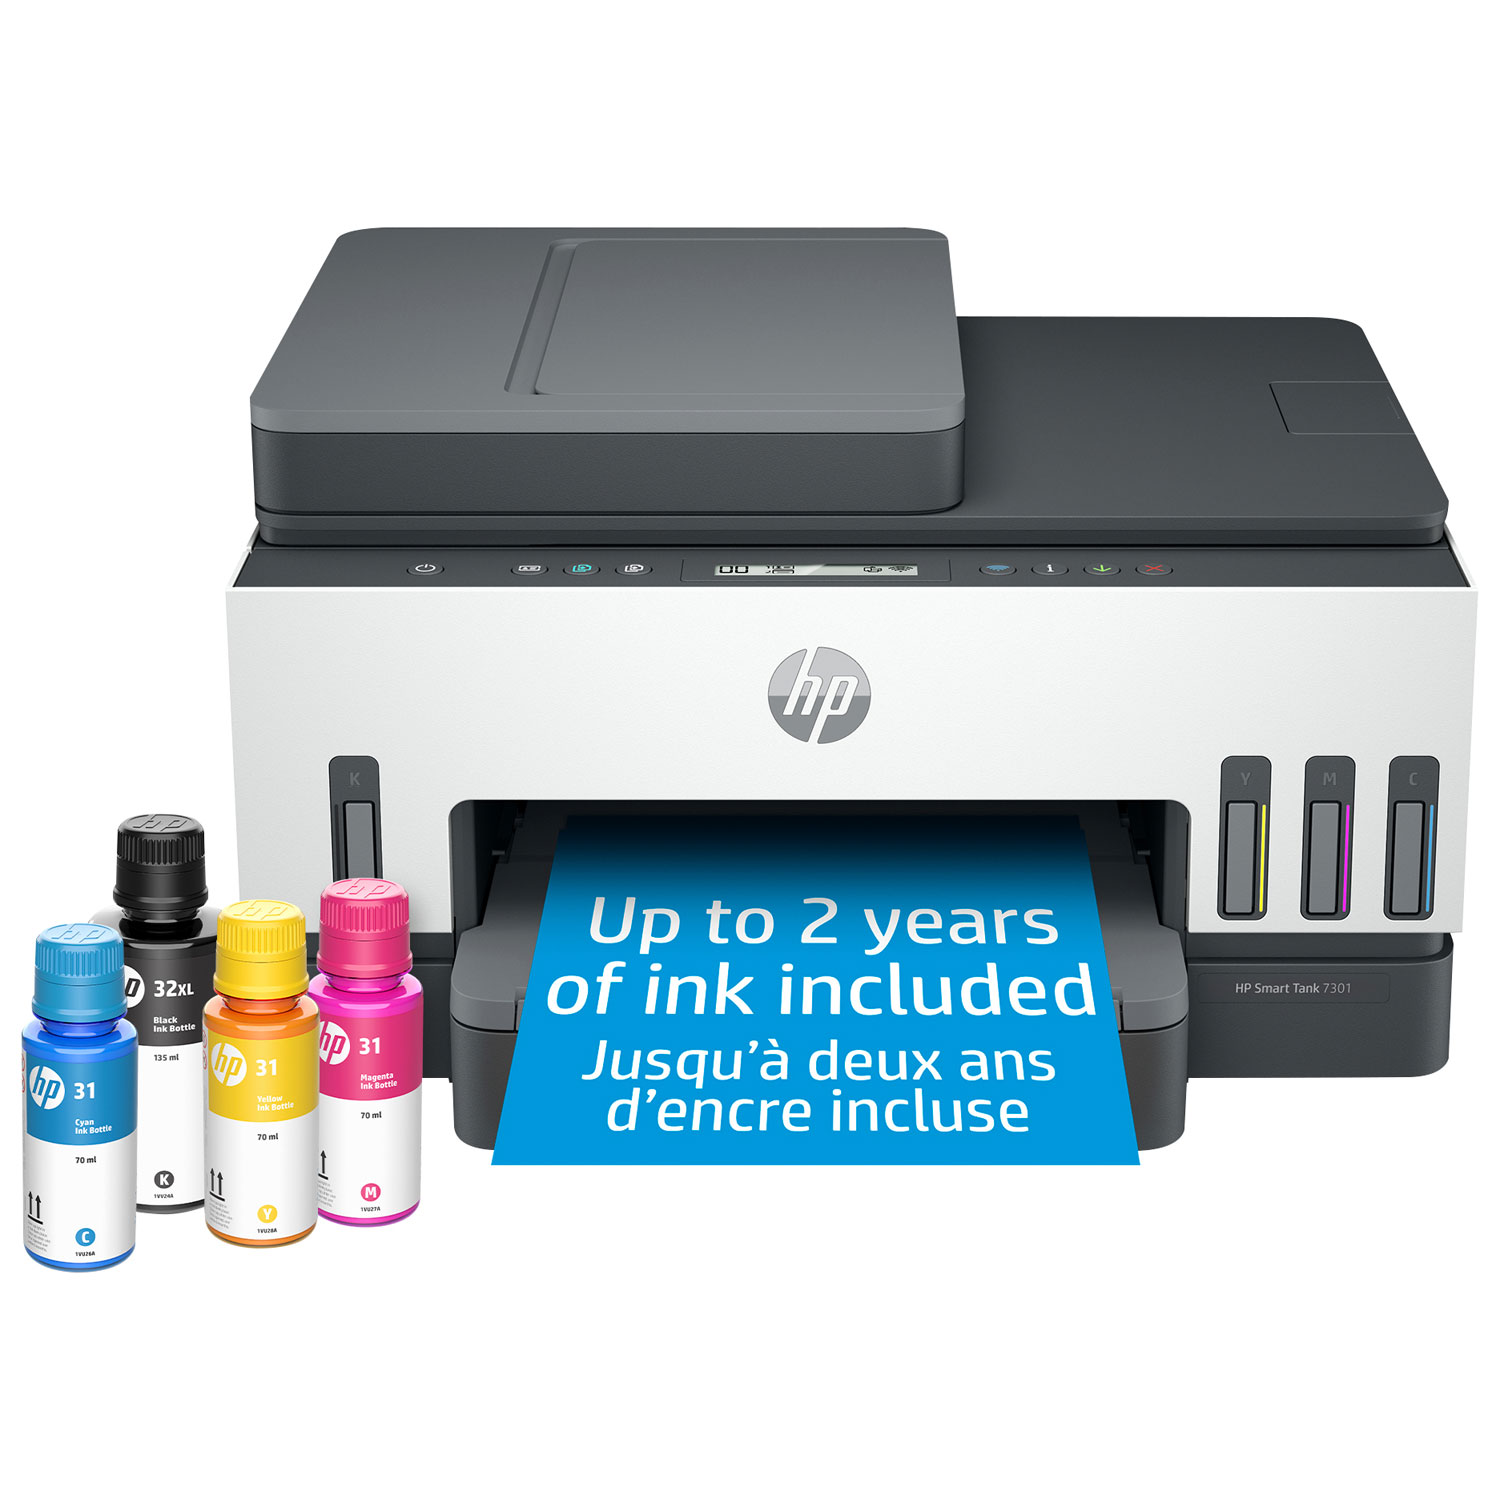 HP Smart Tank 7301 Wireless All-In-One Supertank Inkjet Printer - Up to 2 Years of Ink Included*